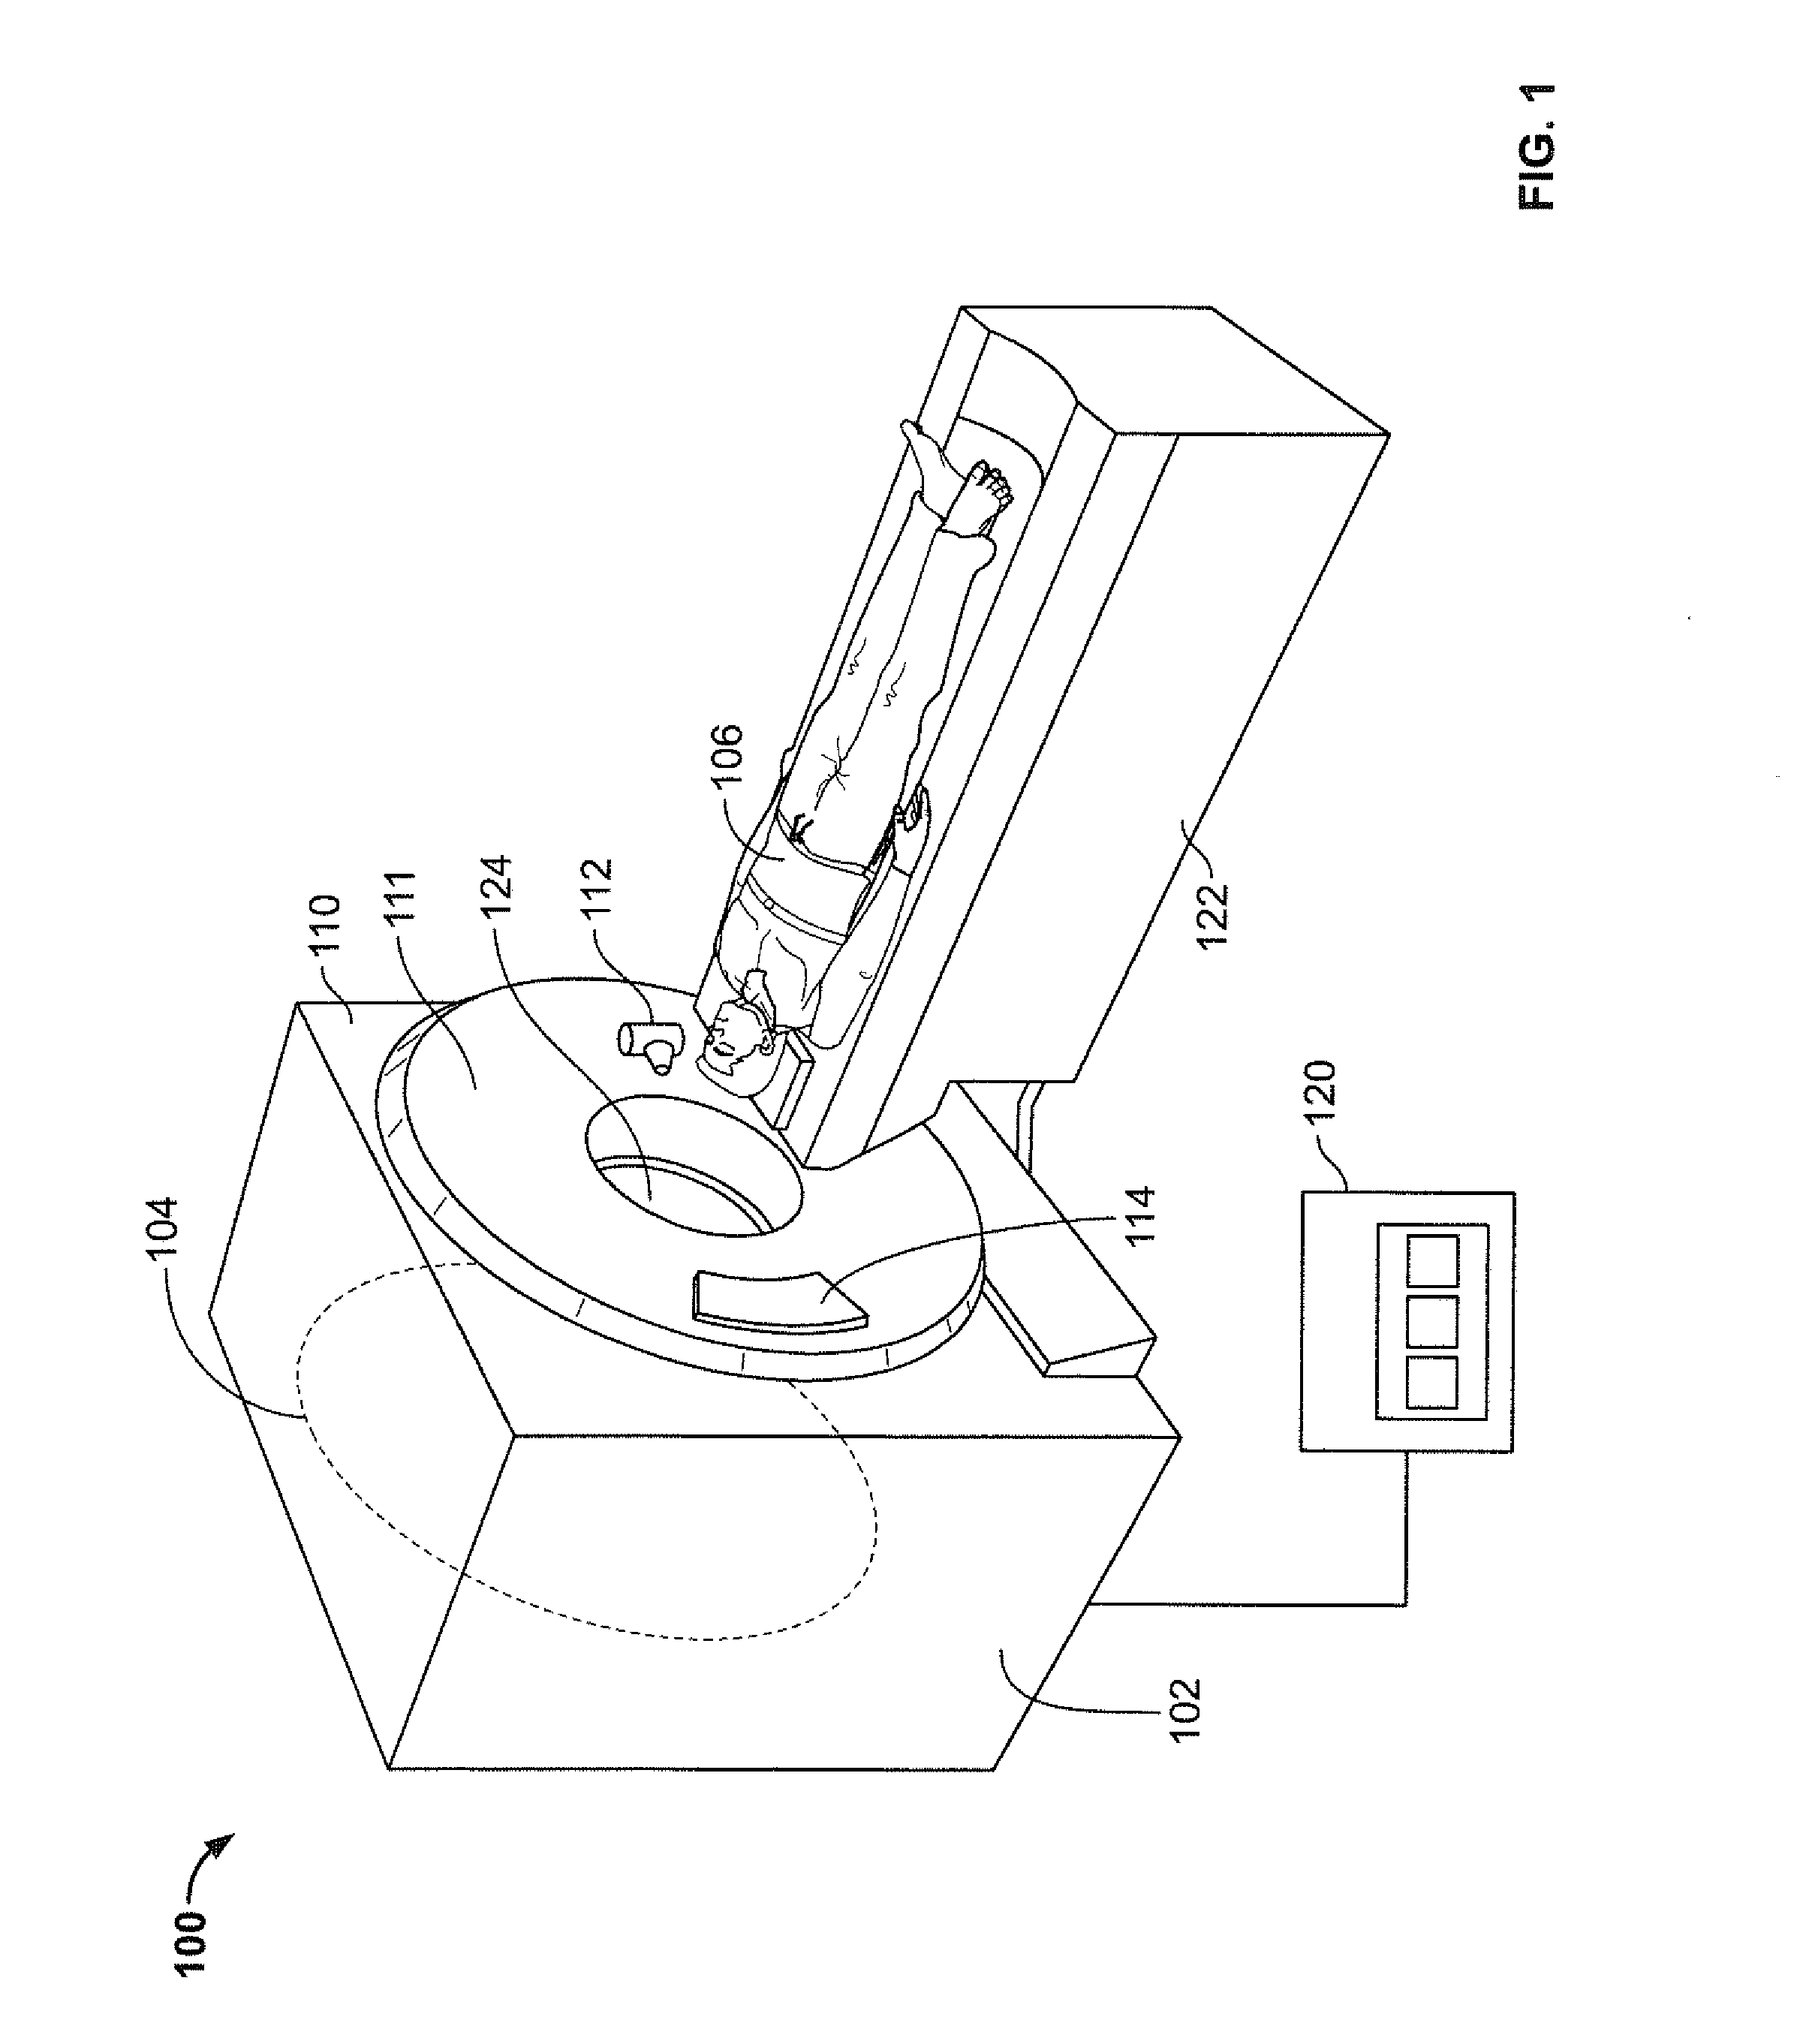 Systems and methods for integration of a positron emission tomography (PET) detector with a computed-tomography (CT) gantry